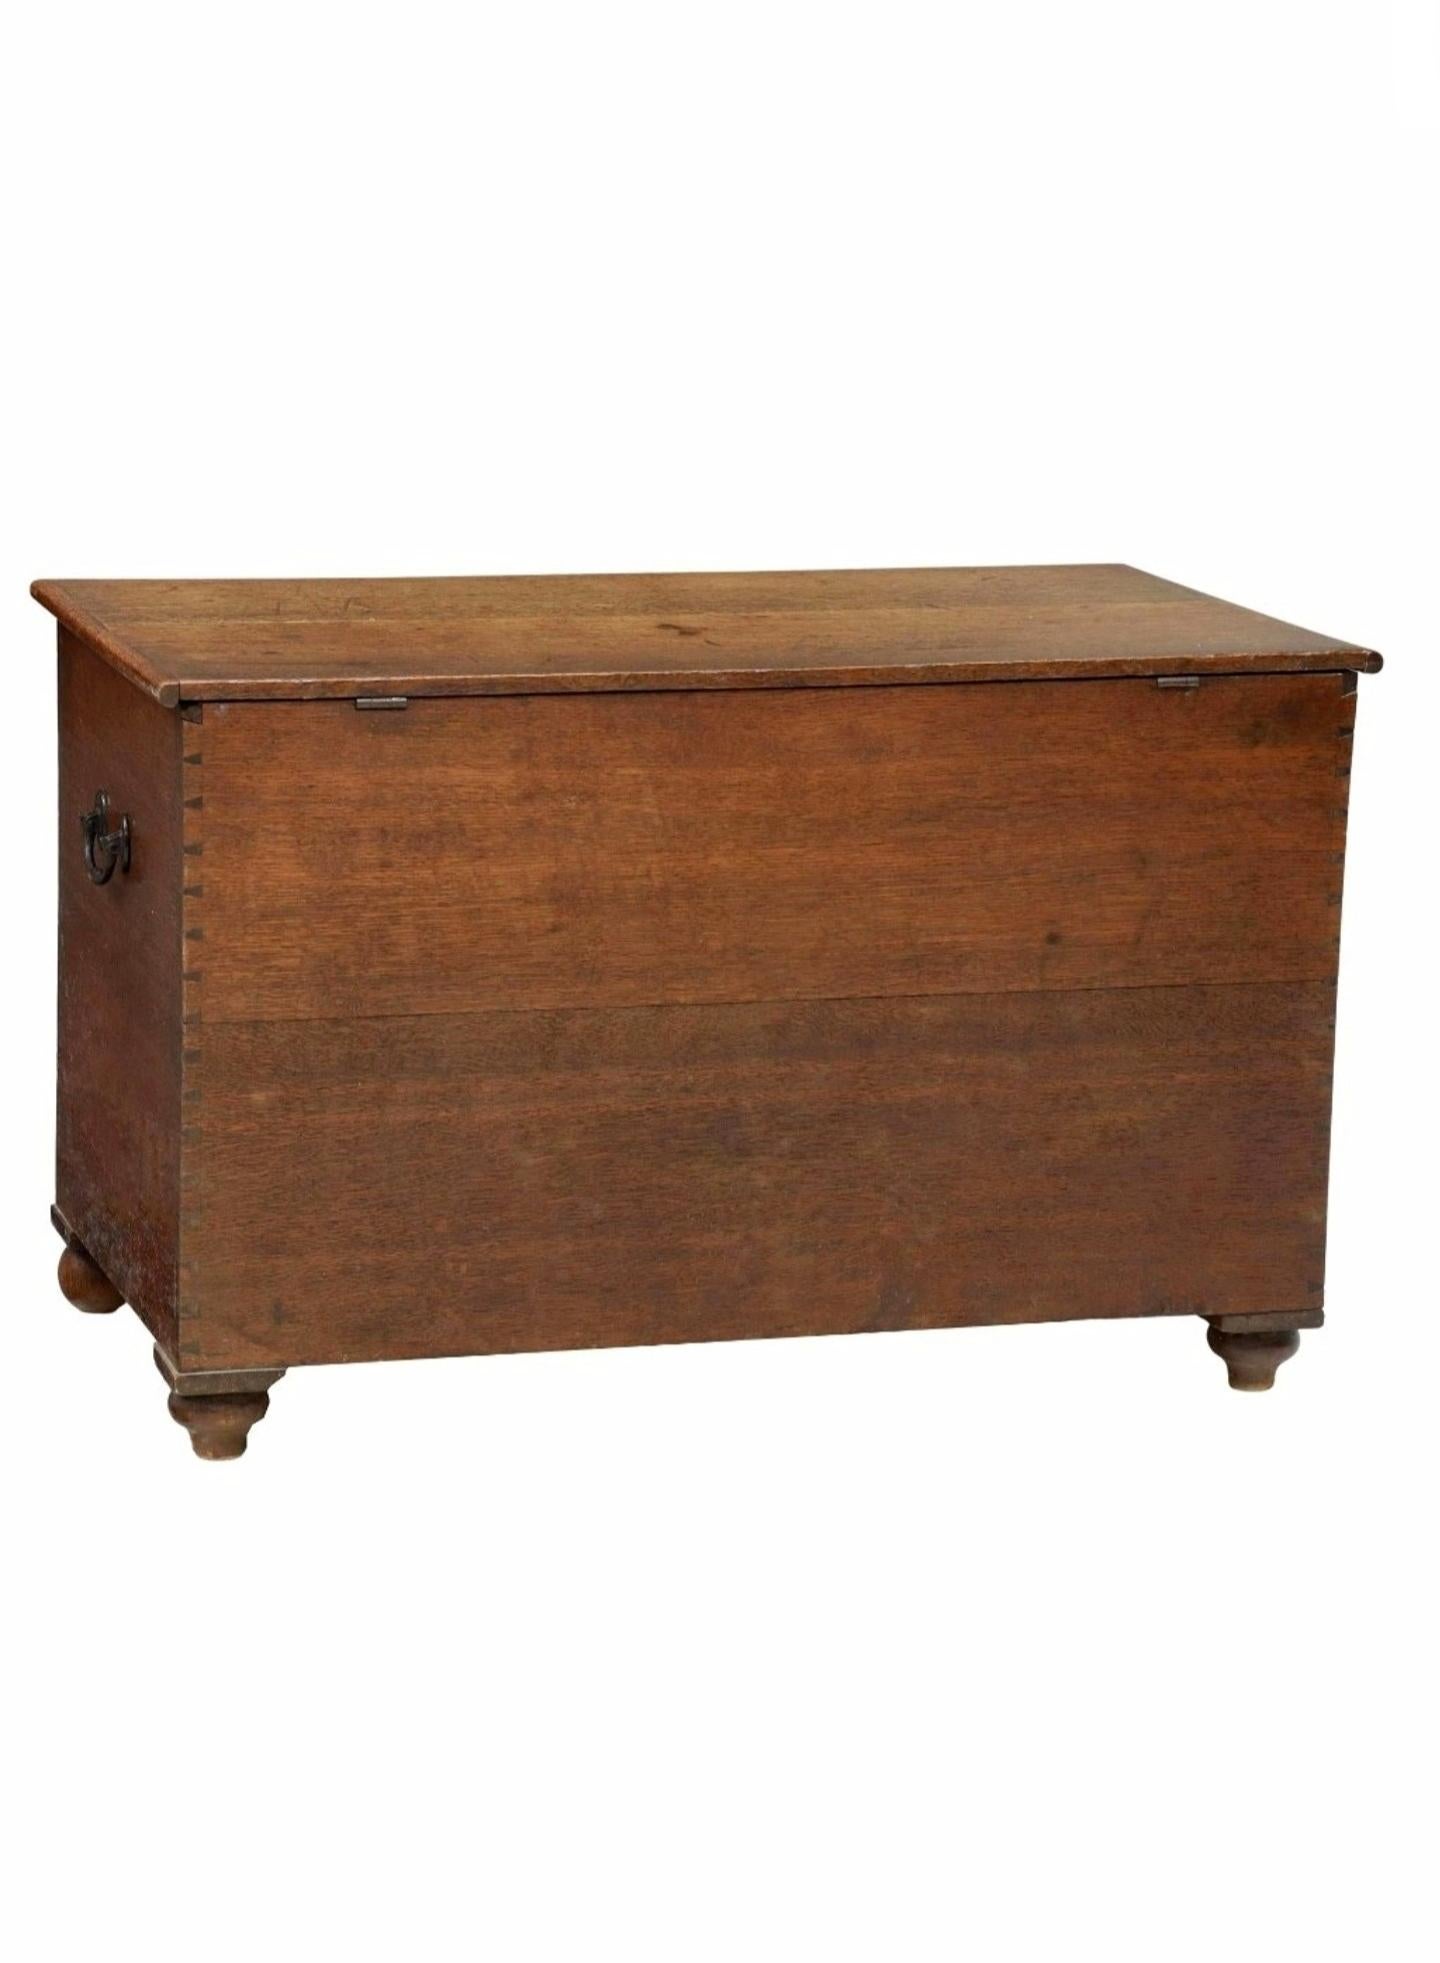 Antique Georgian Period Dovetailed Oak Mule Chest  In Good Condition For Sale In Forney, TX